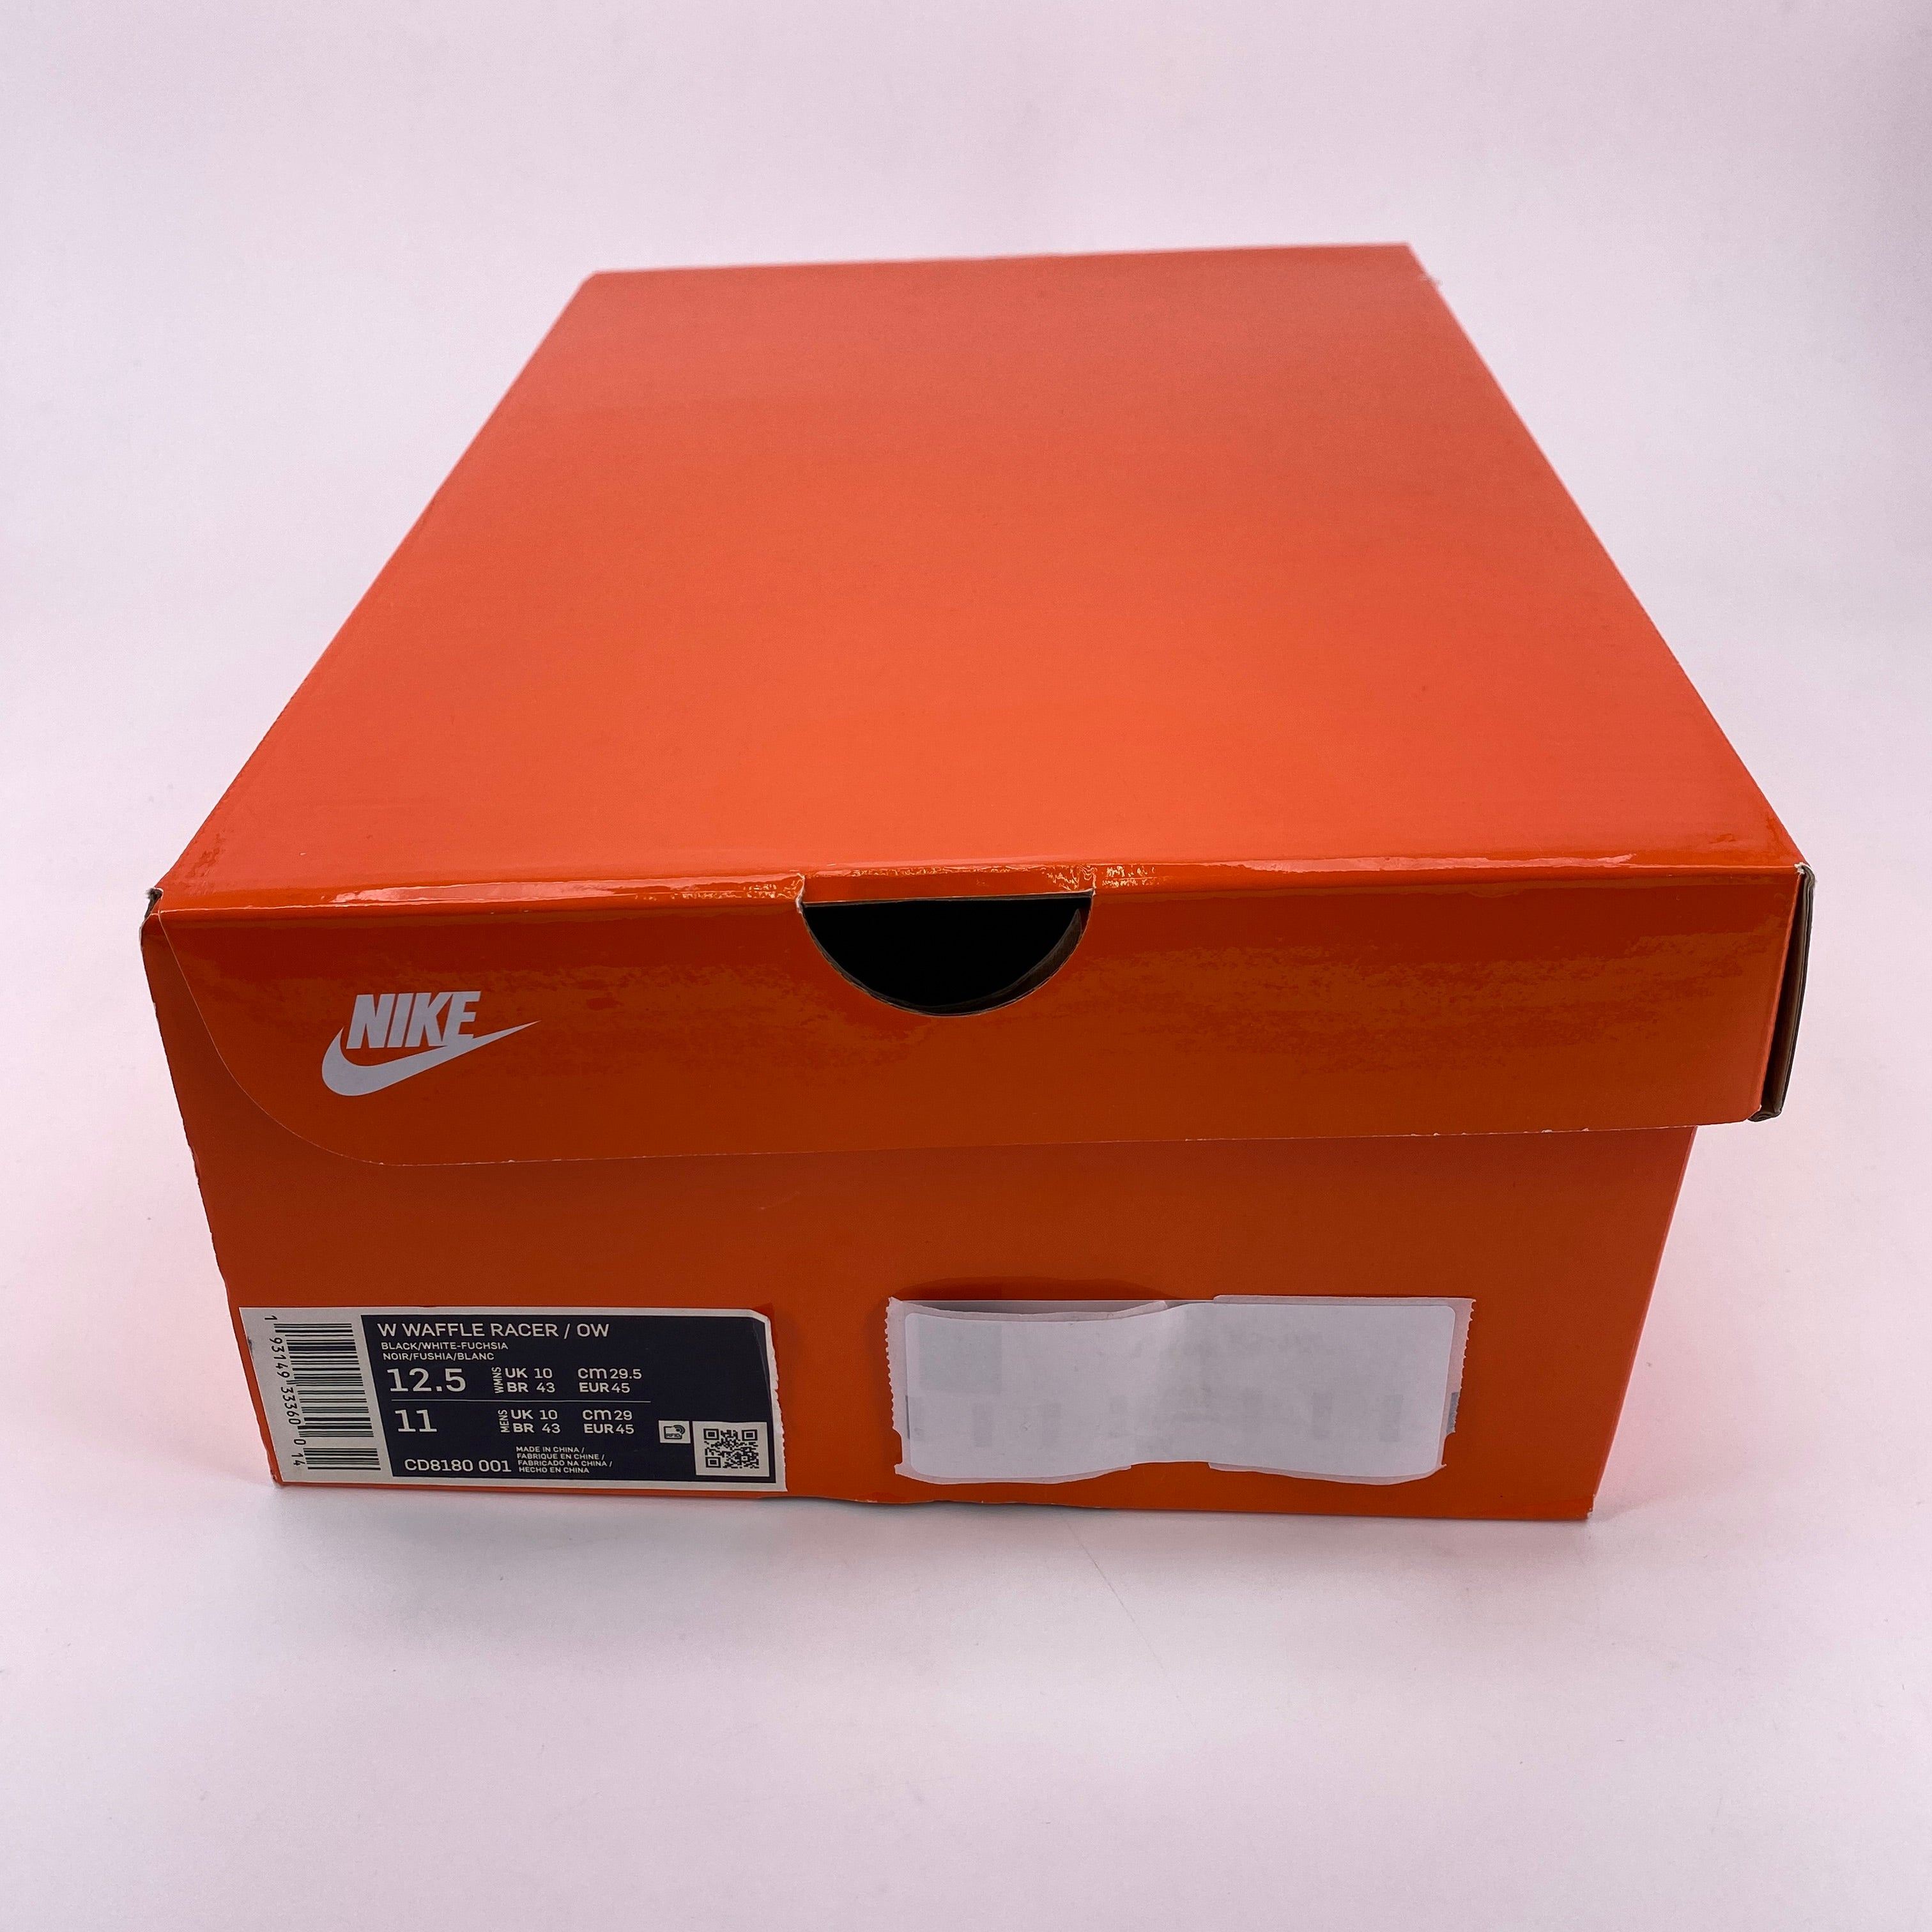 Nike (W) Waffle Racer / OW &quot;Black&quot; 2019 New Size 12.5W